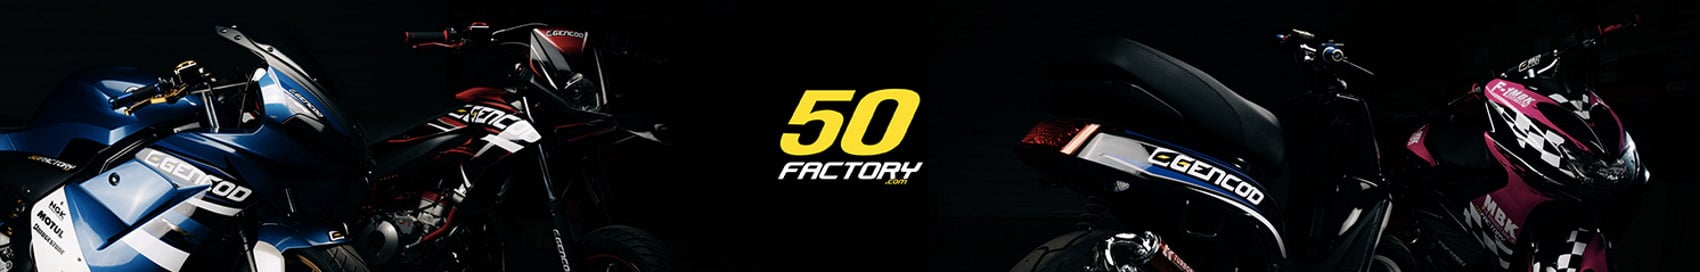 general information about 50 Factory